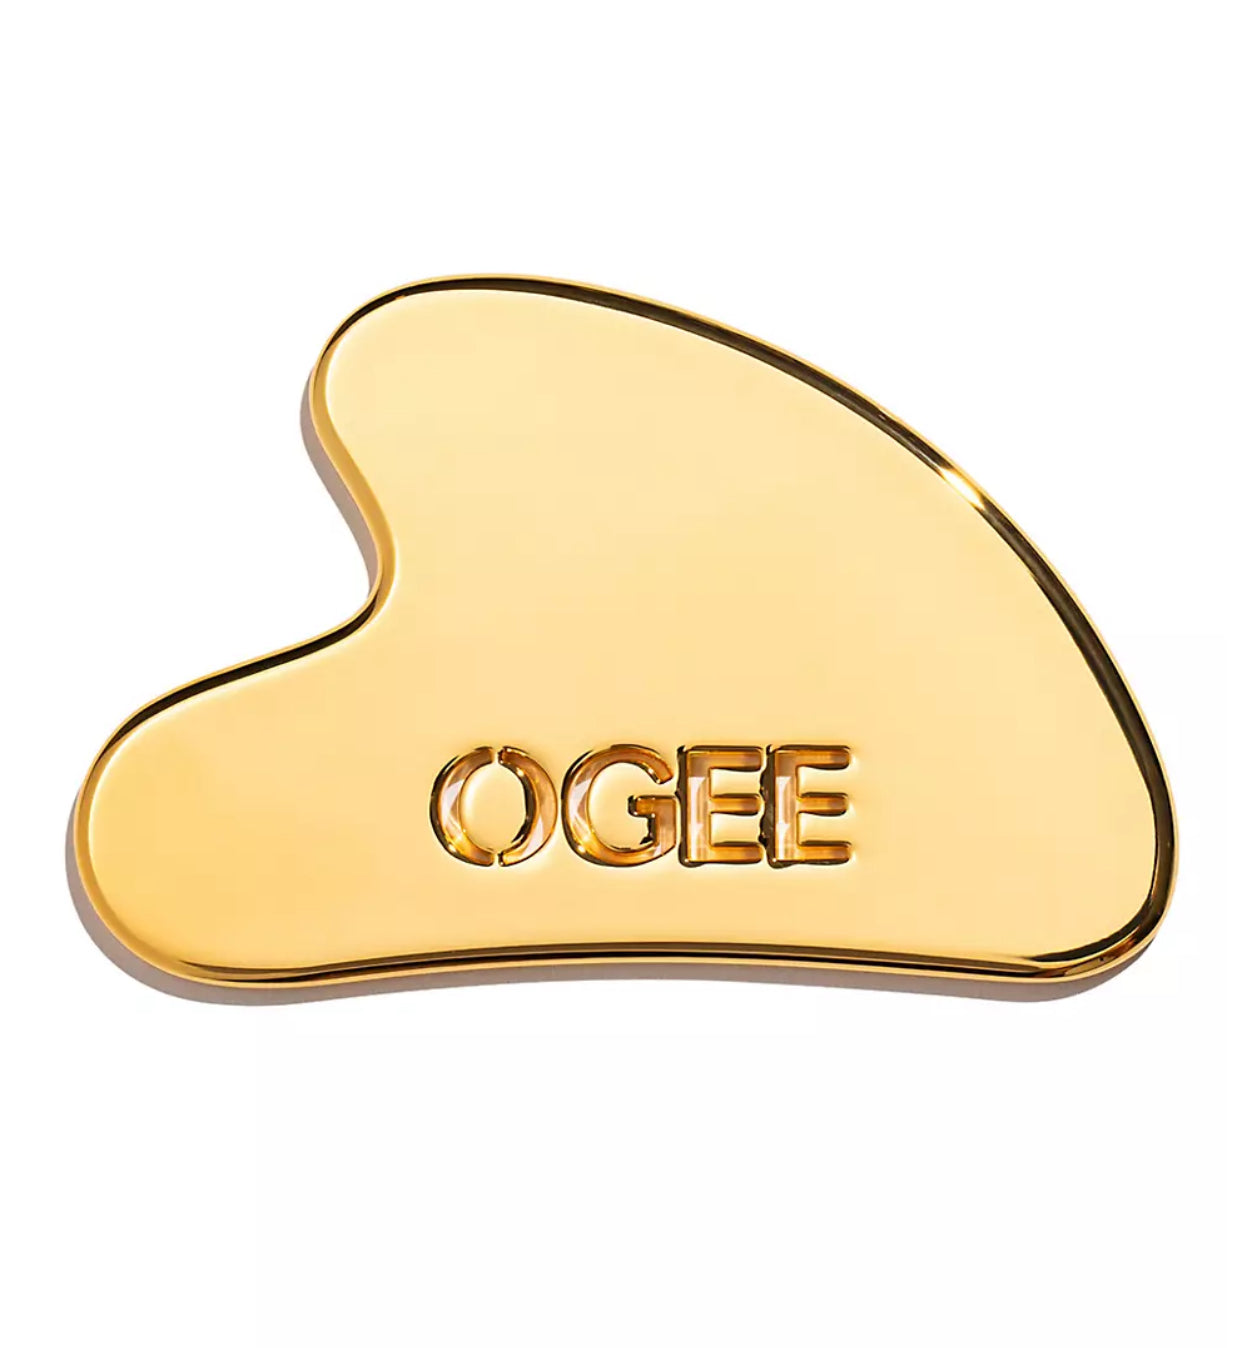 Ogee The Sculptor